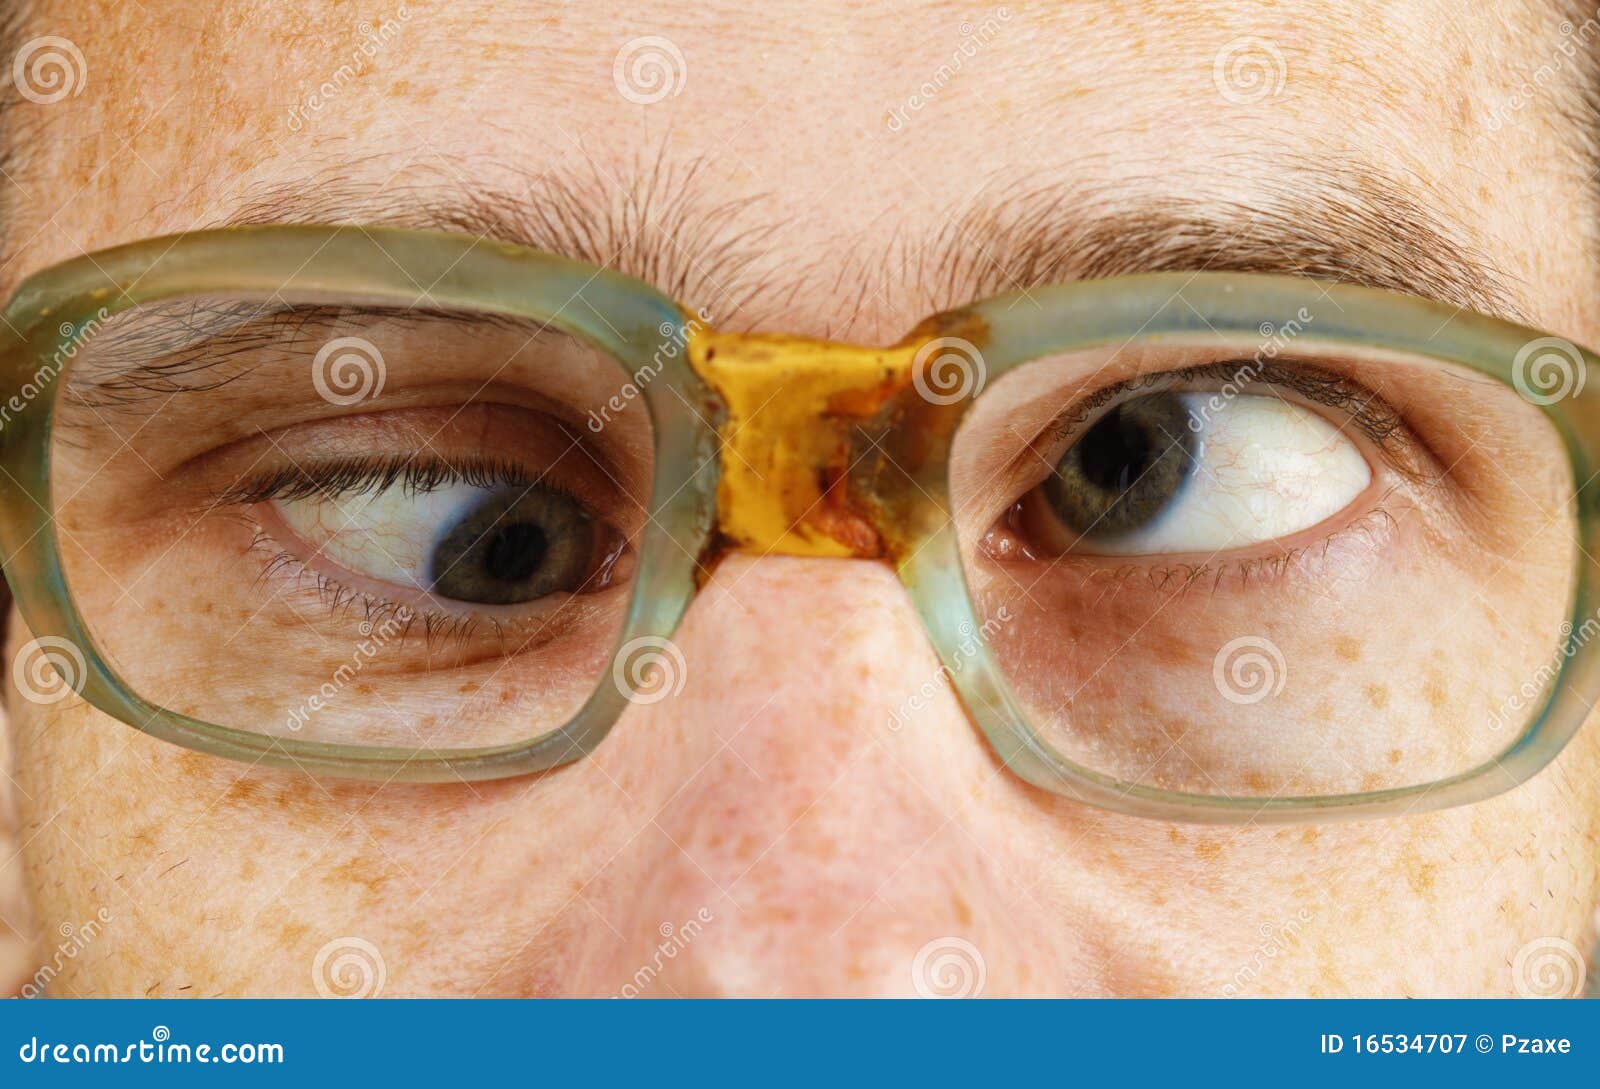 cross-eyed person in old-fashioned spectacles